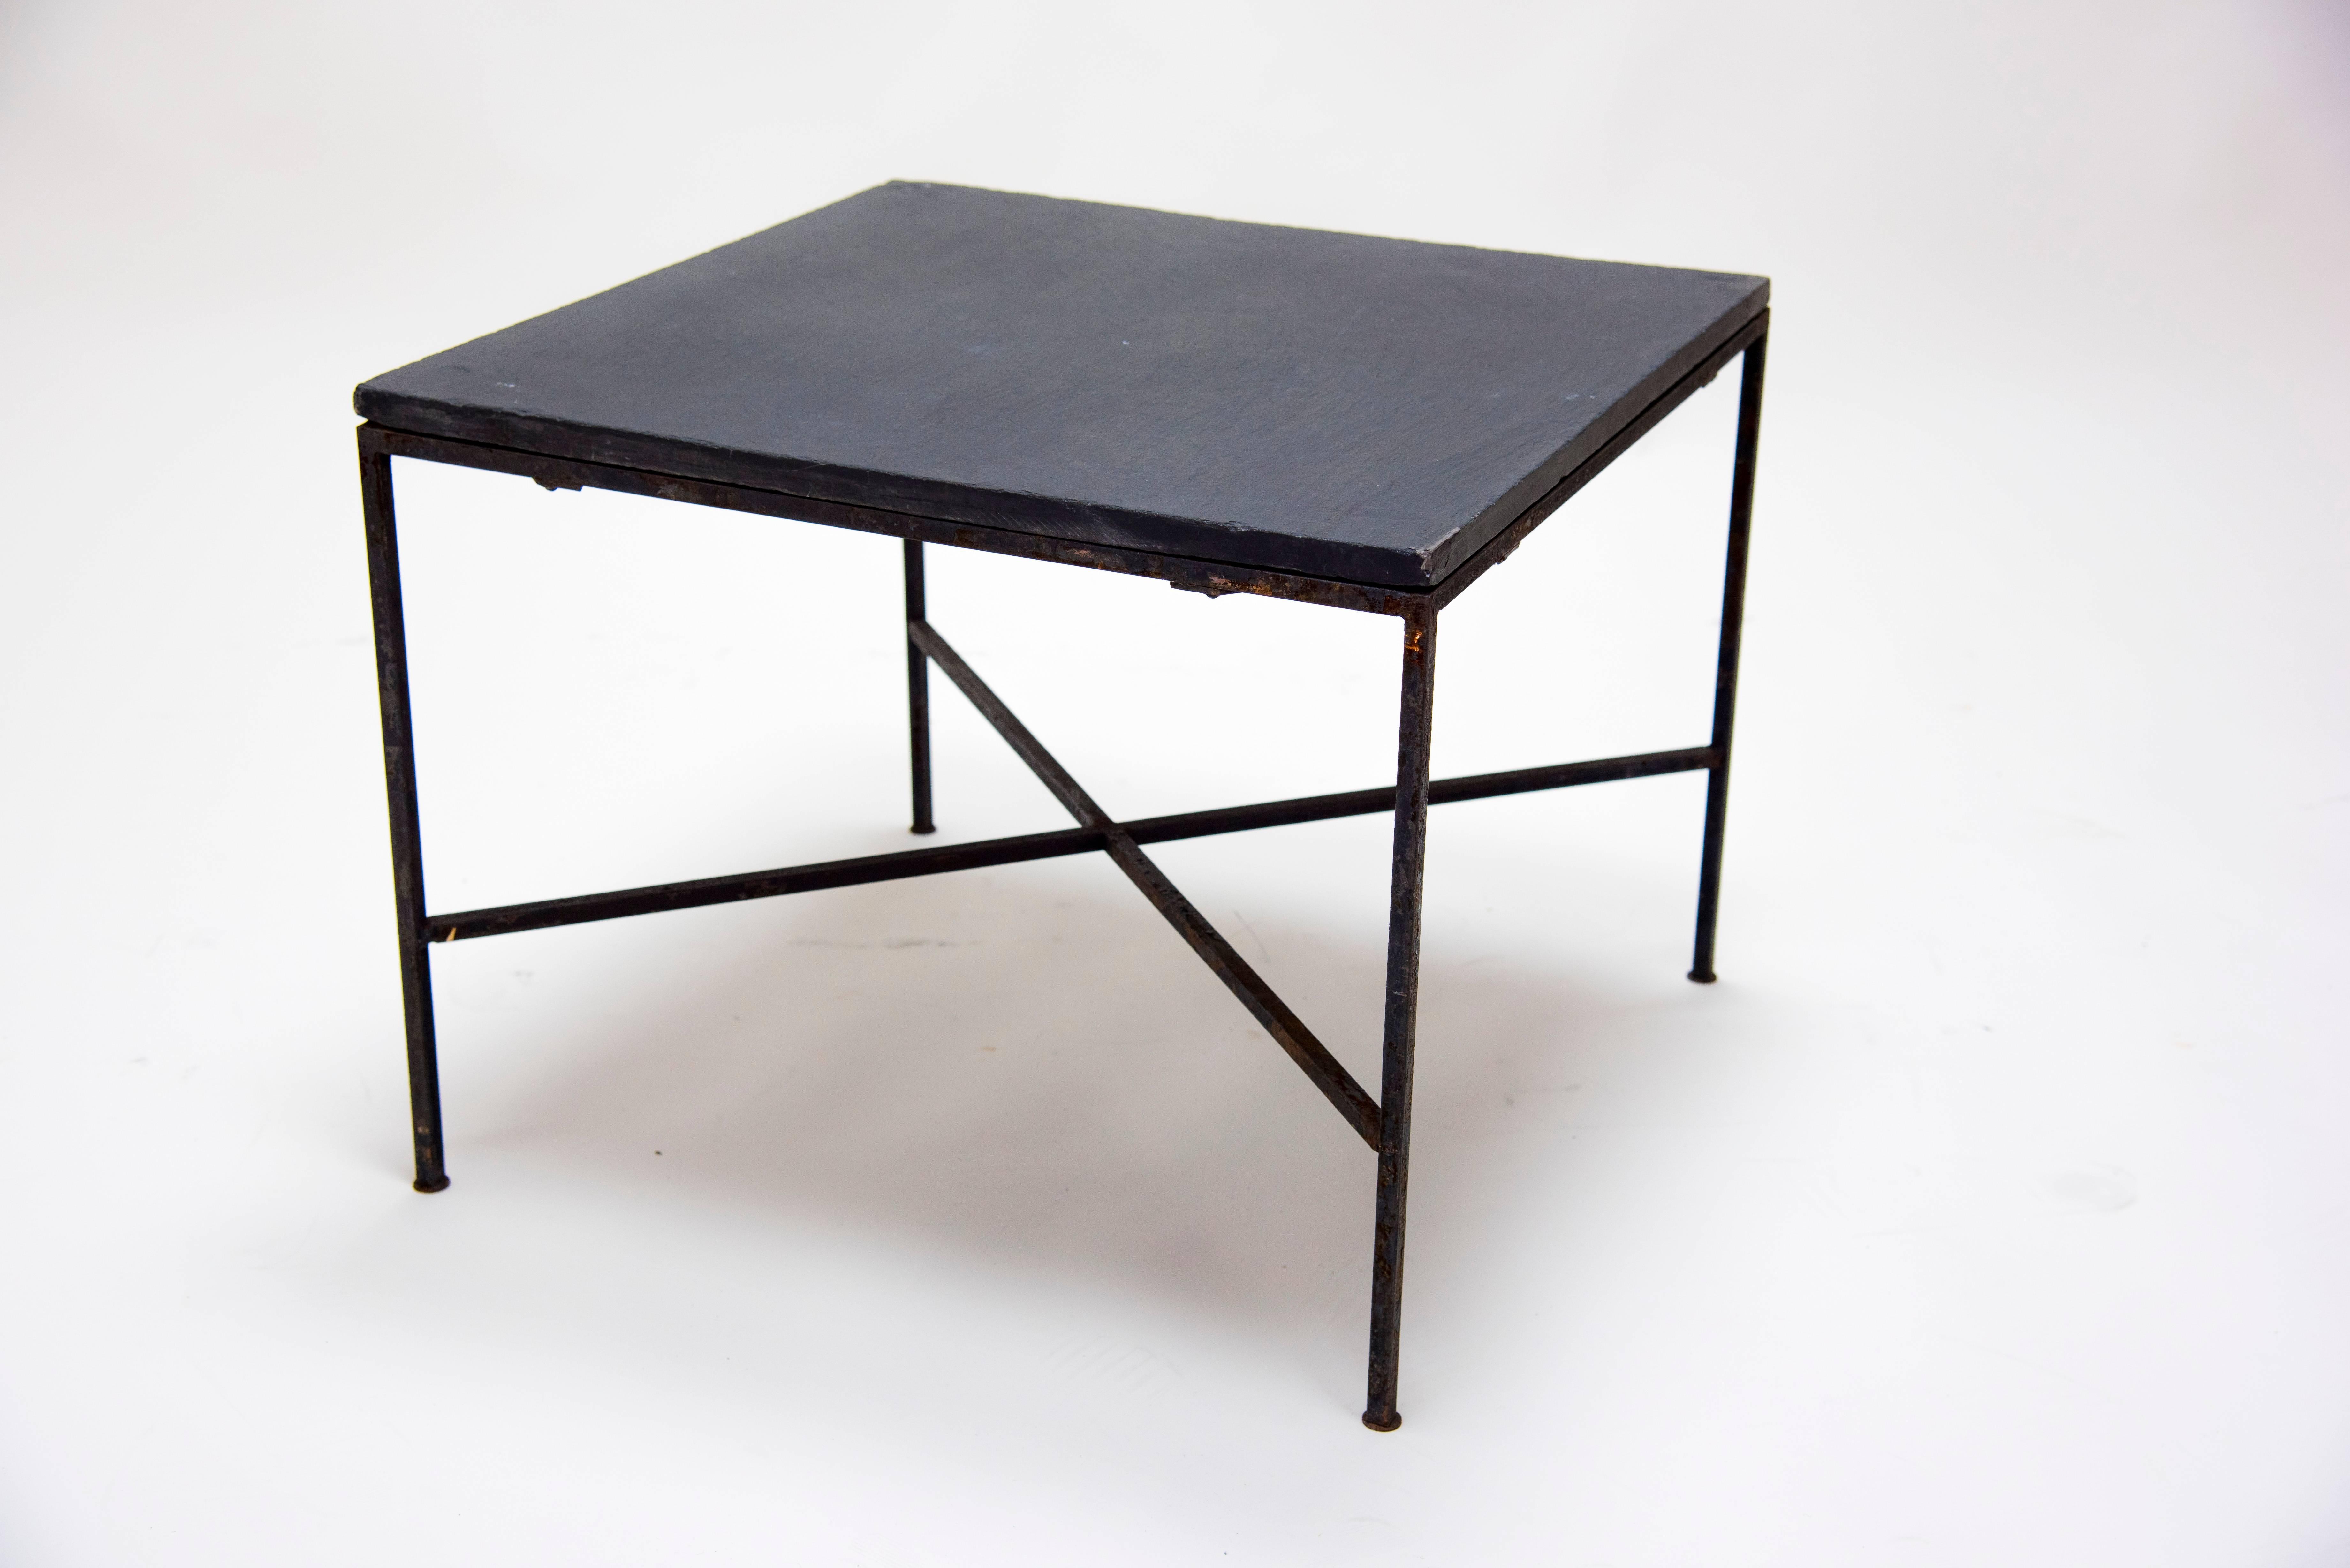 American Pair of Iron and Slate Mid-Century Modern End Tables in the Style of Paul McCobb